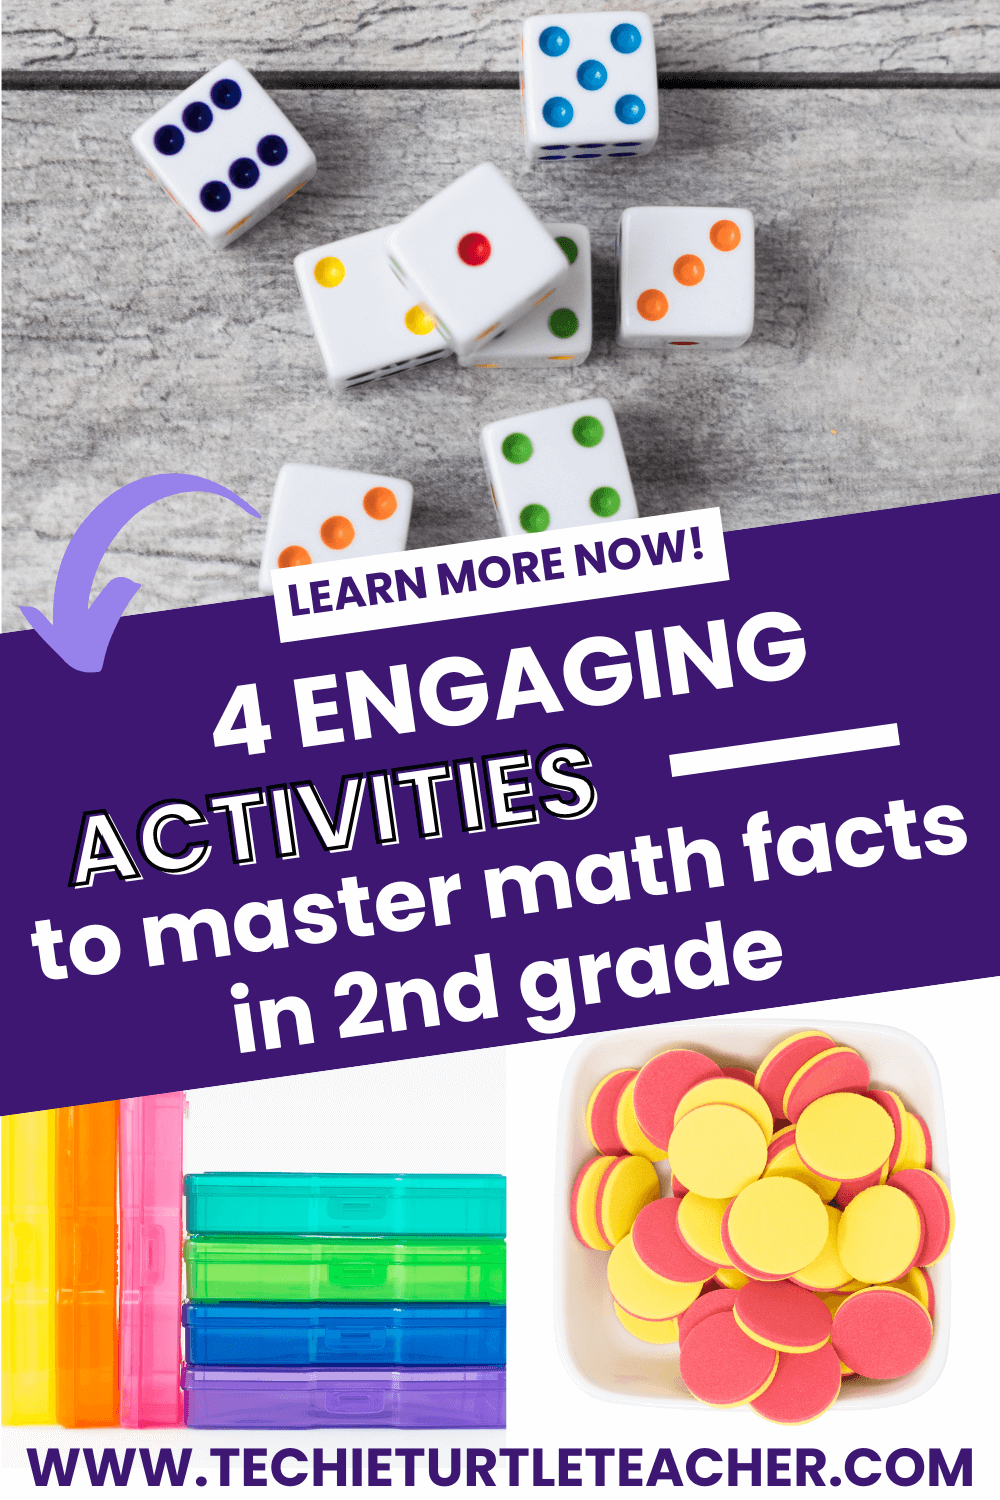 4 engaging activities to master math facts in 2nd grade